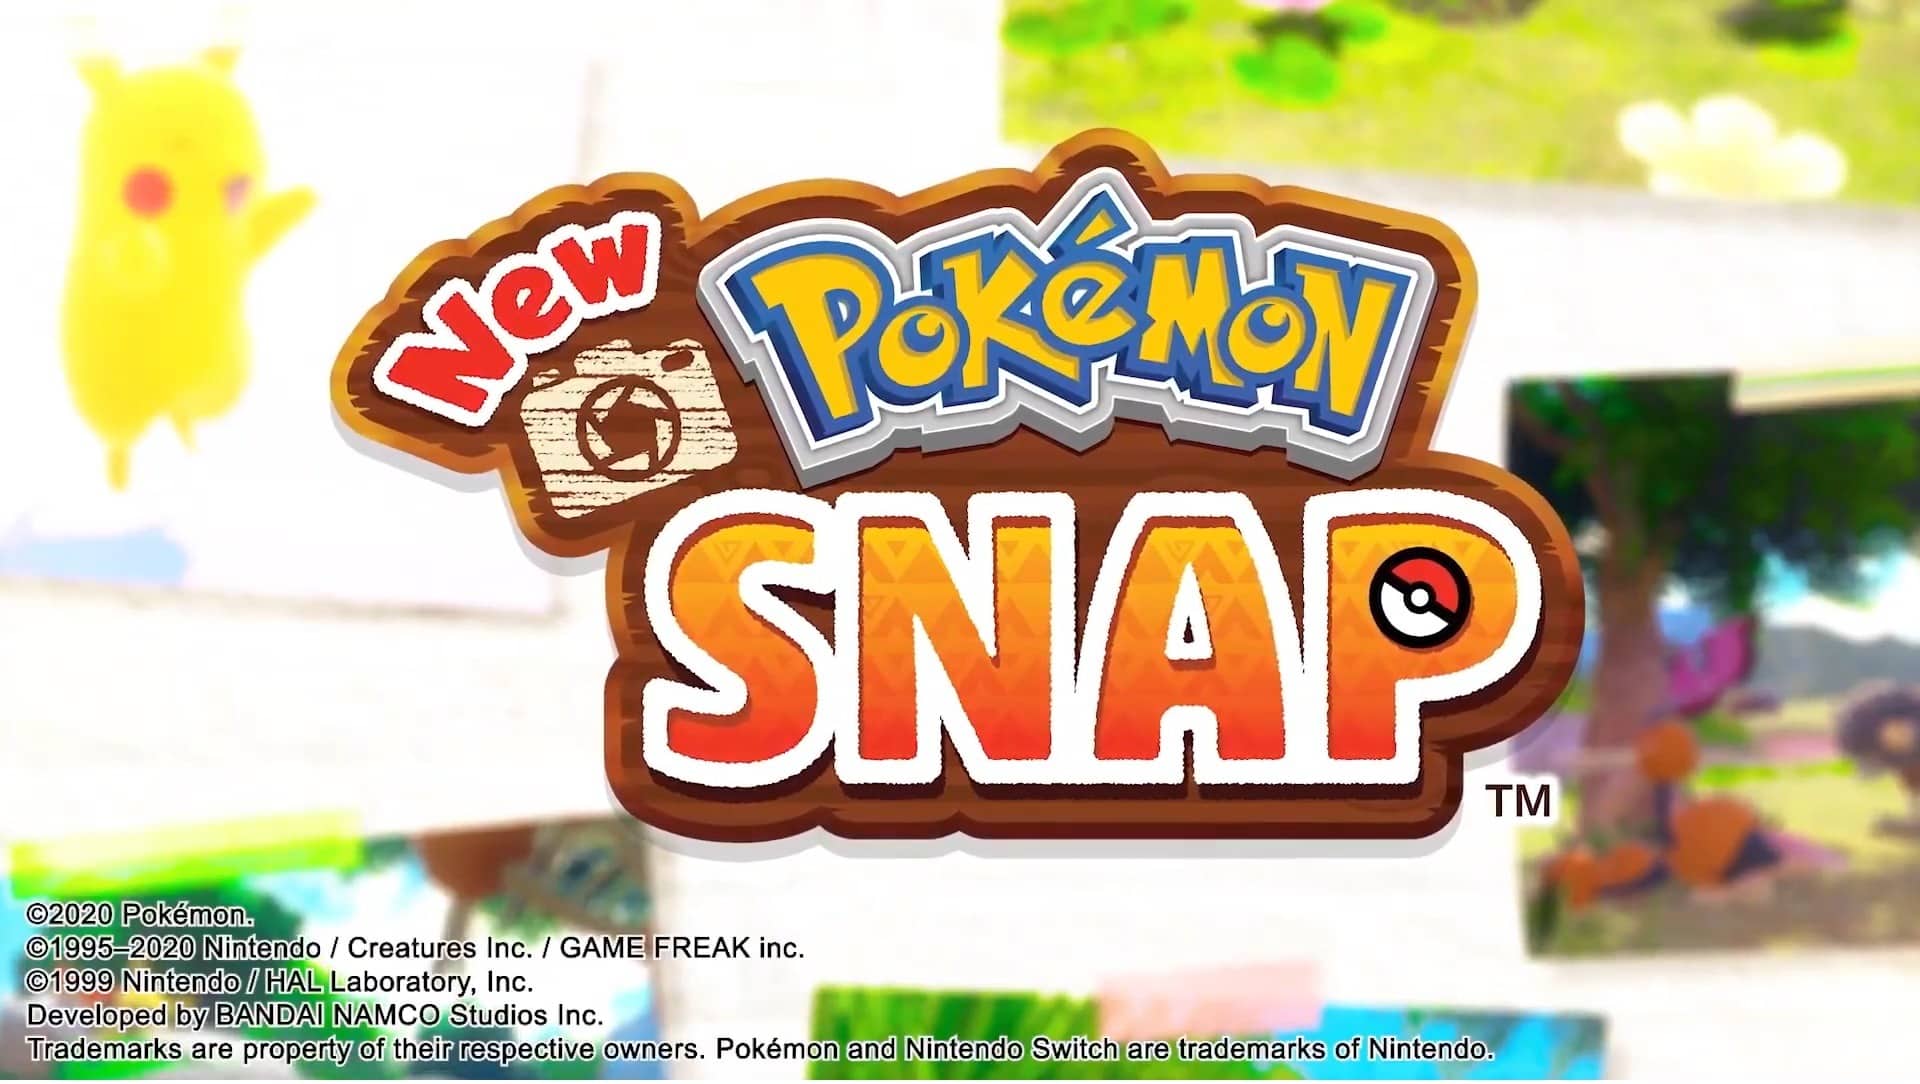 New Pokemon Snap, Puzzle Game, Toothbrushing App and More Announced